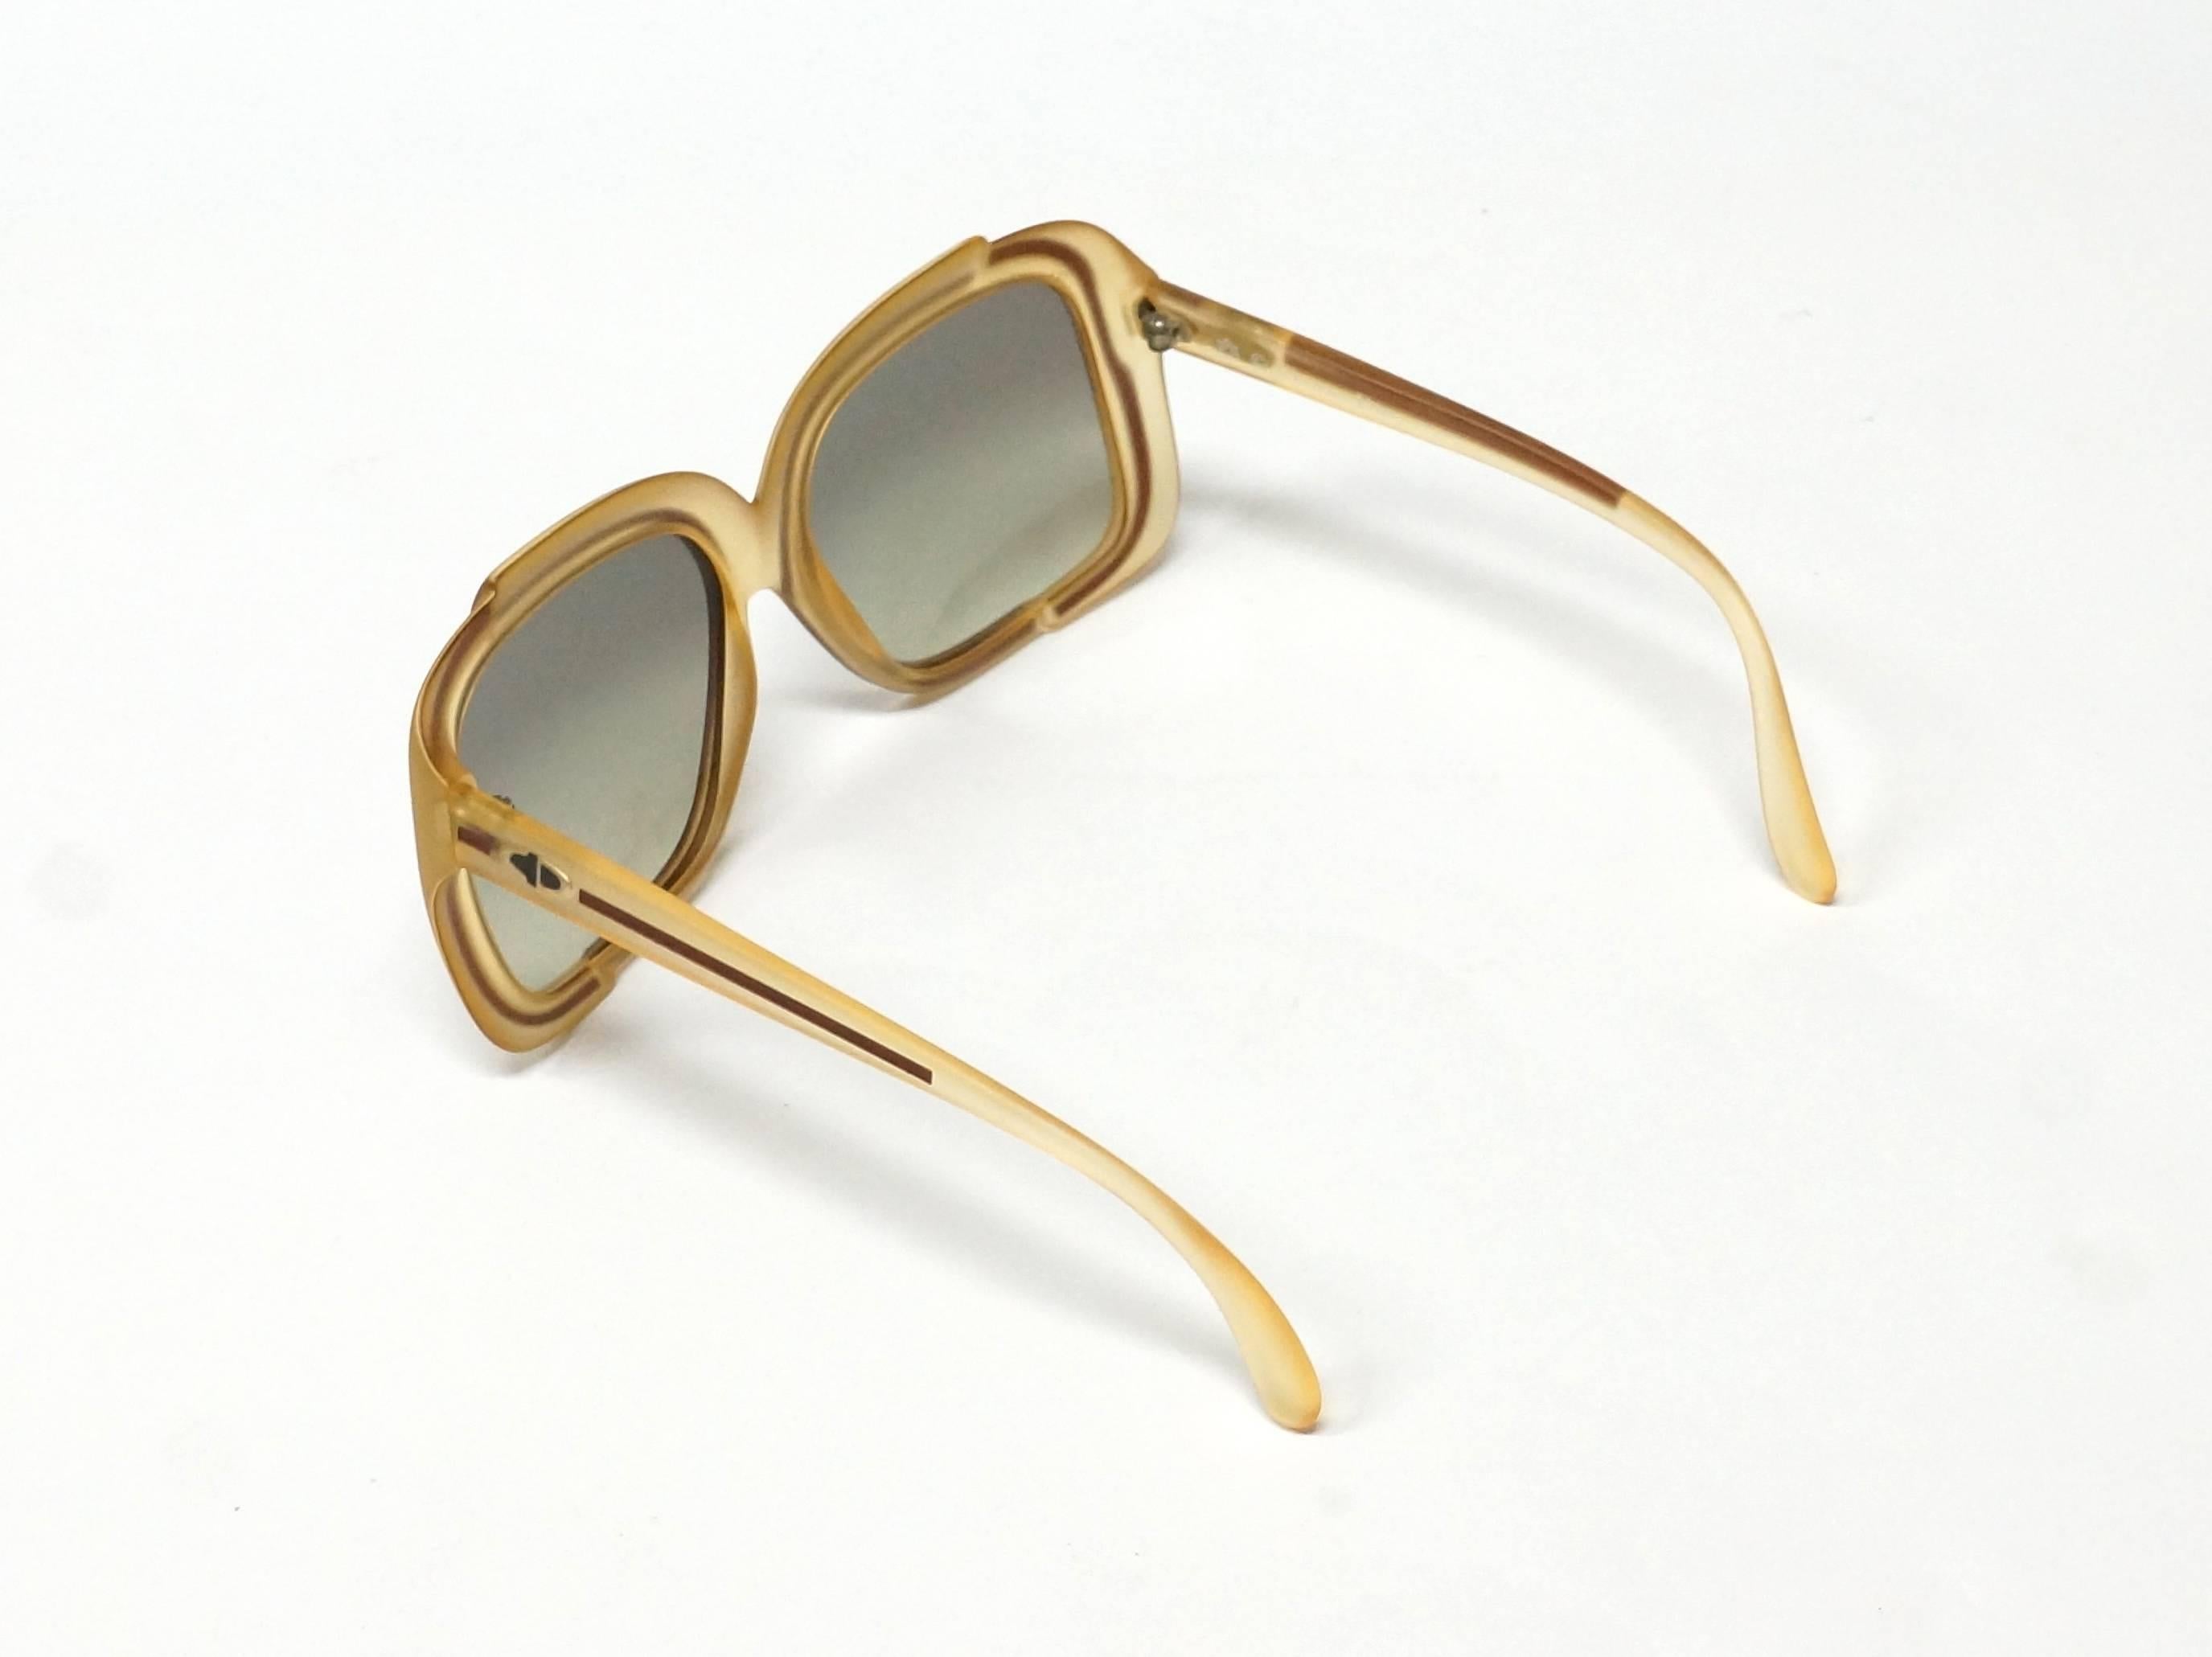 1970s Christian Dior Sunglasses in New Old Stock Condition For Sale 4